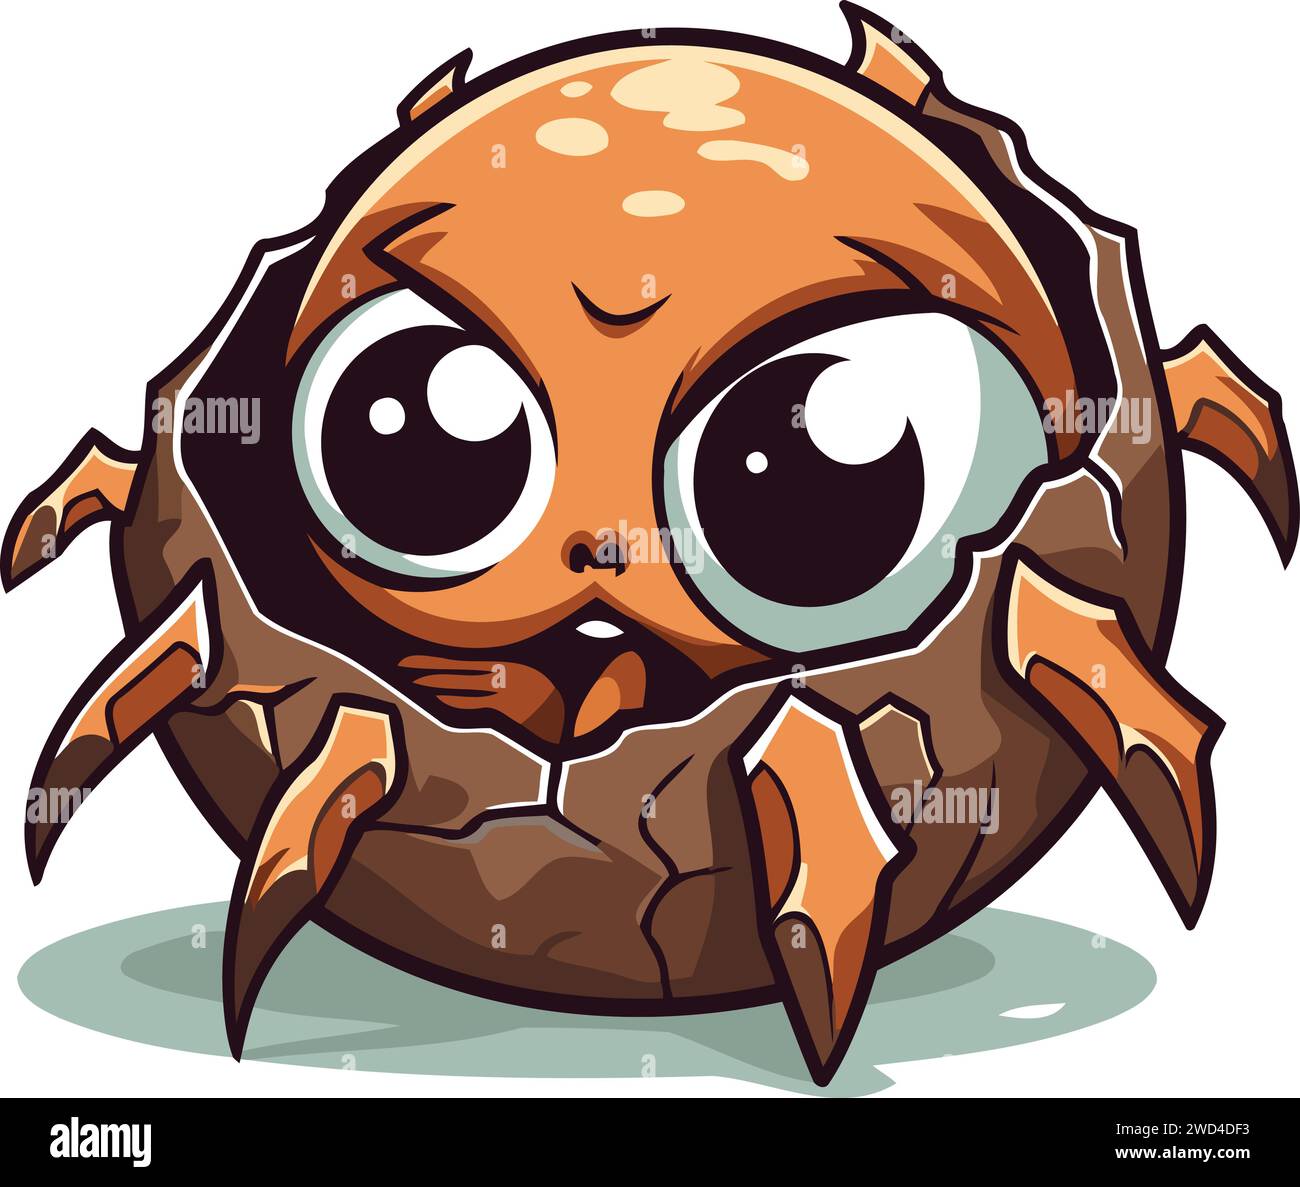 Cute cartoon spider. Vector illustration isolated on a white background. Stock Vector